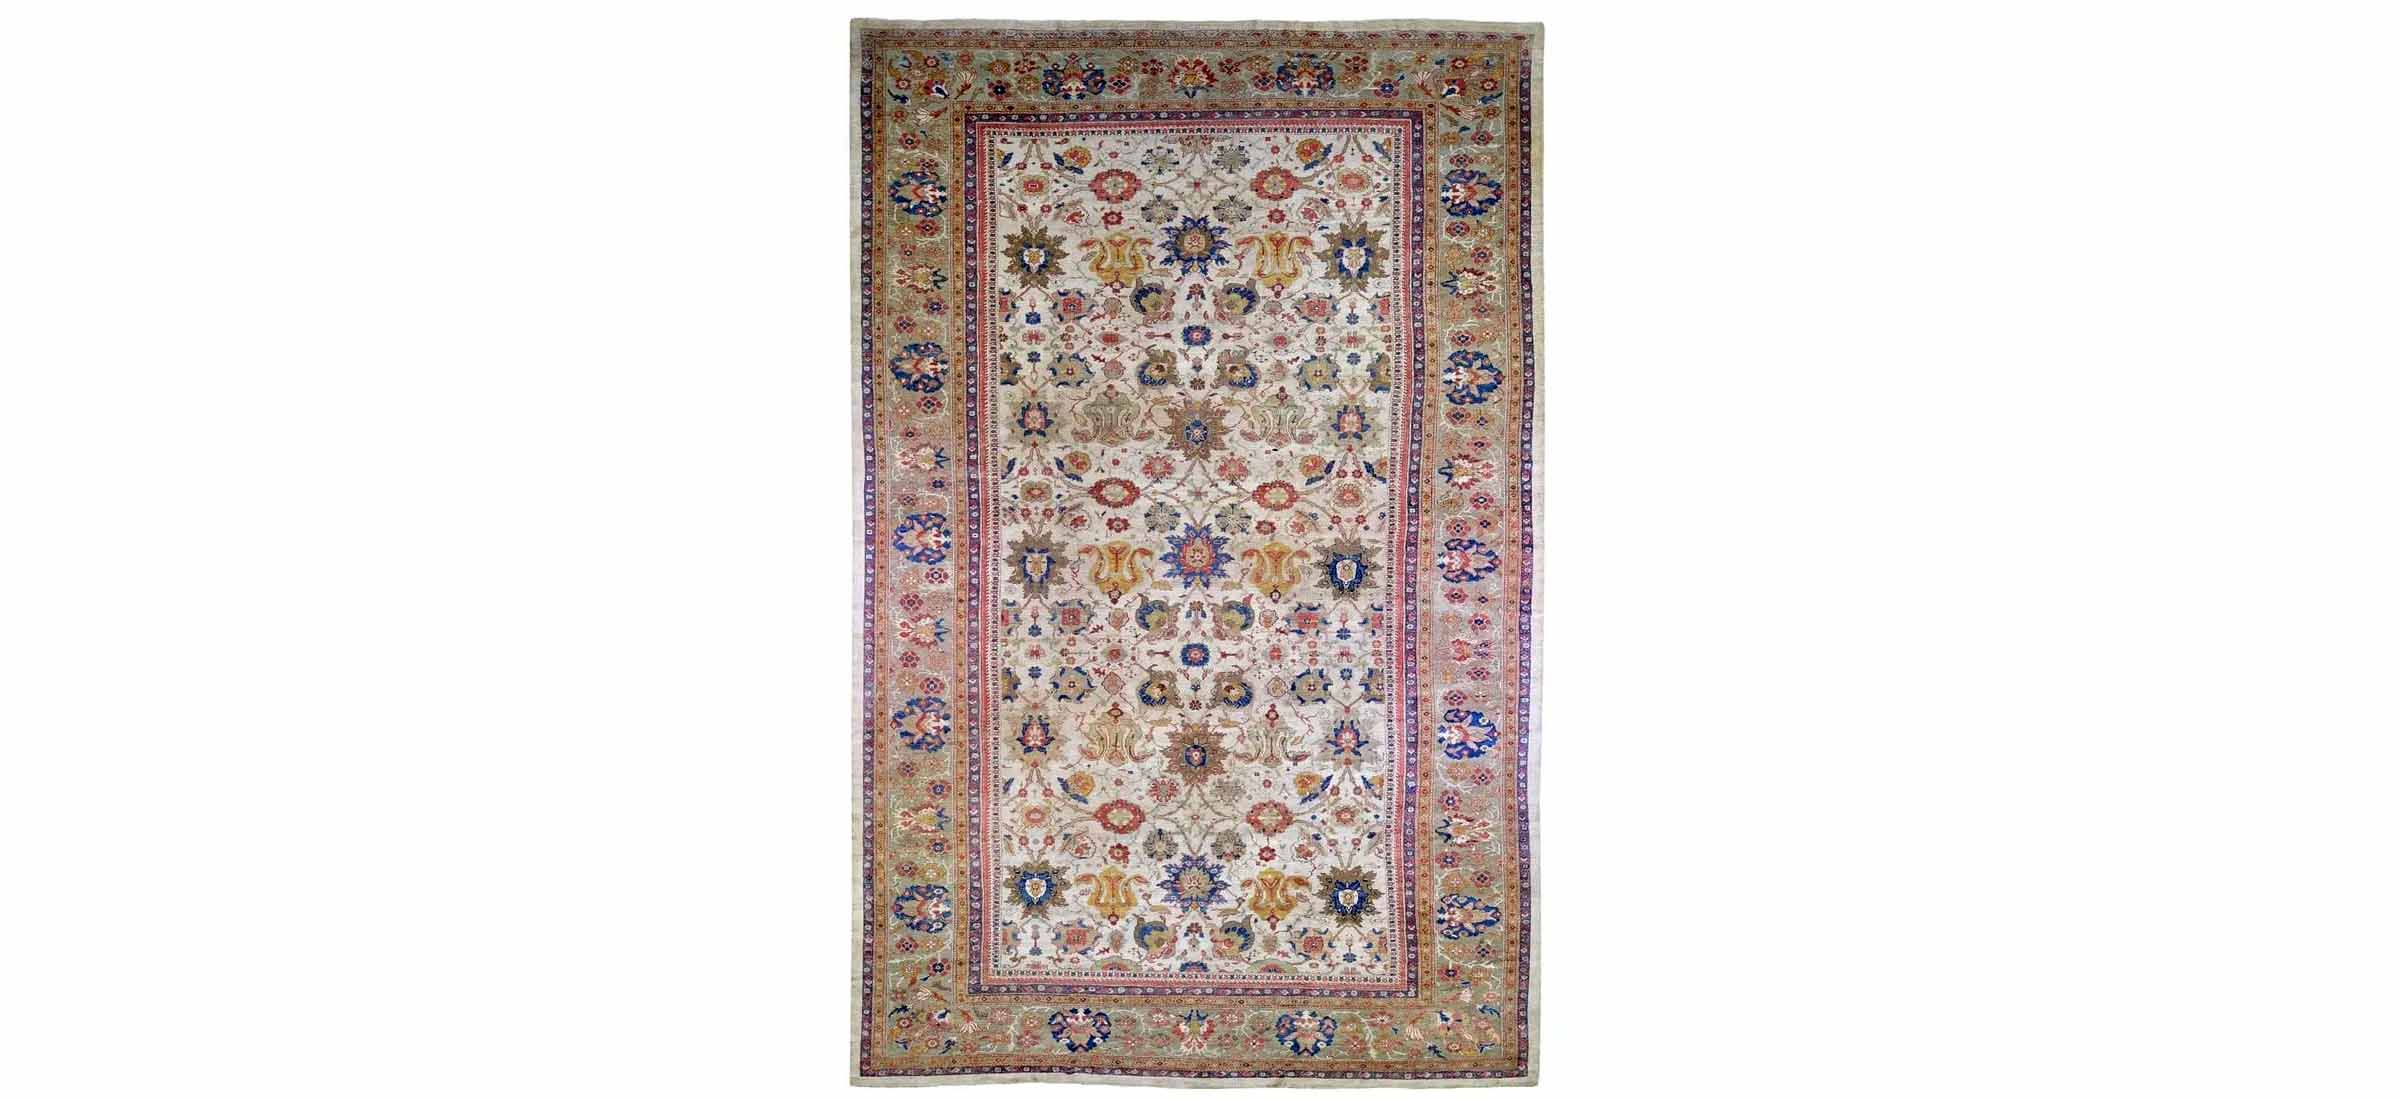 Premium rugs featured in Finest Weaves auction, Aug. 22